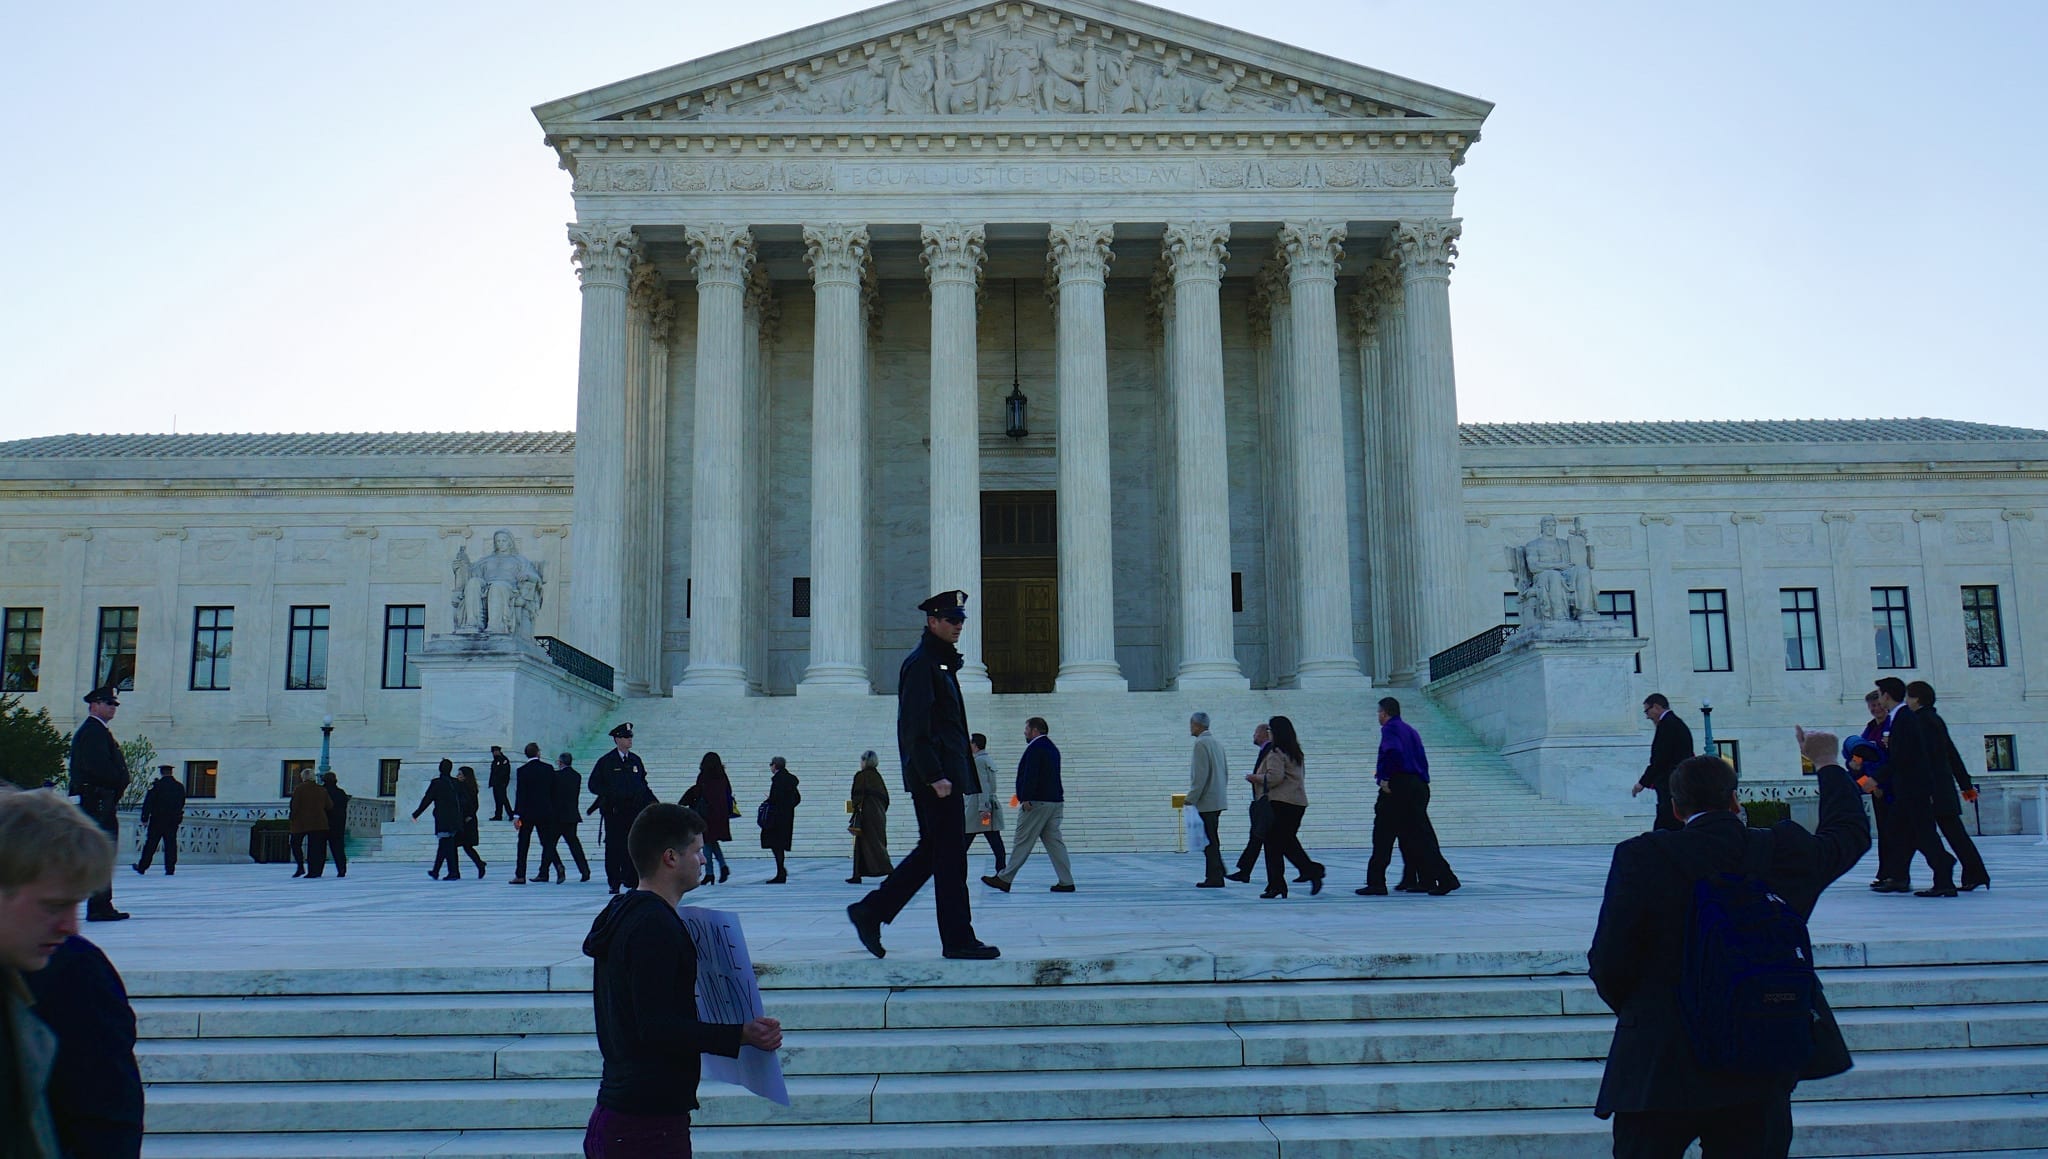 SCOTUS building; image by Ted Eytan, via Flickr, CC BY-SA 2.0, no changes.